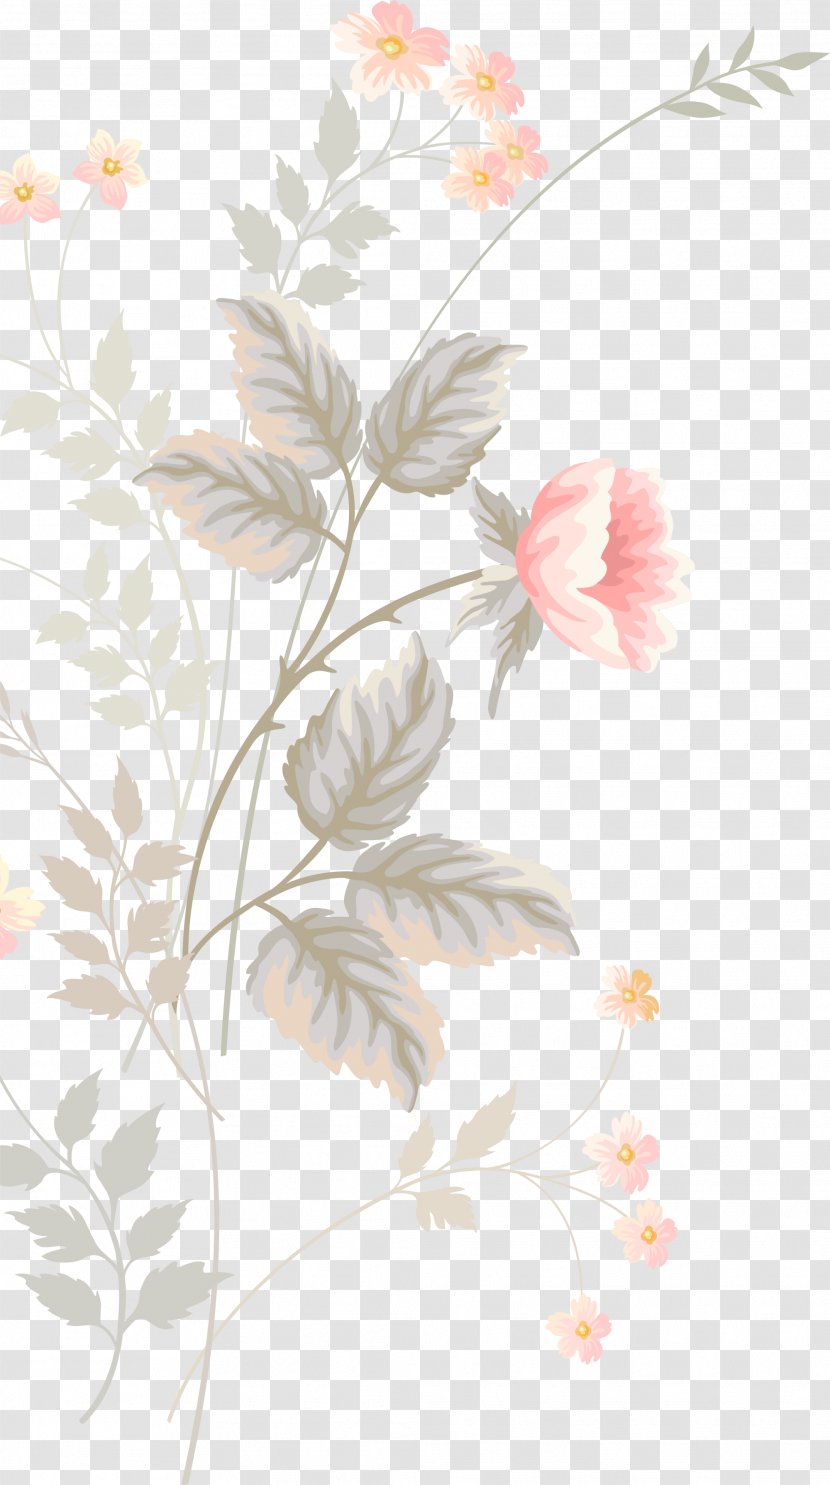 Floral Design Flower Watercolor Painting Pattern - Branch - Pink Hand-painted Flowers Transparent PNG